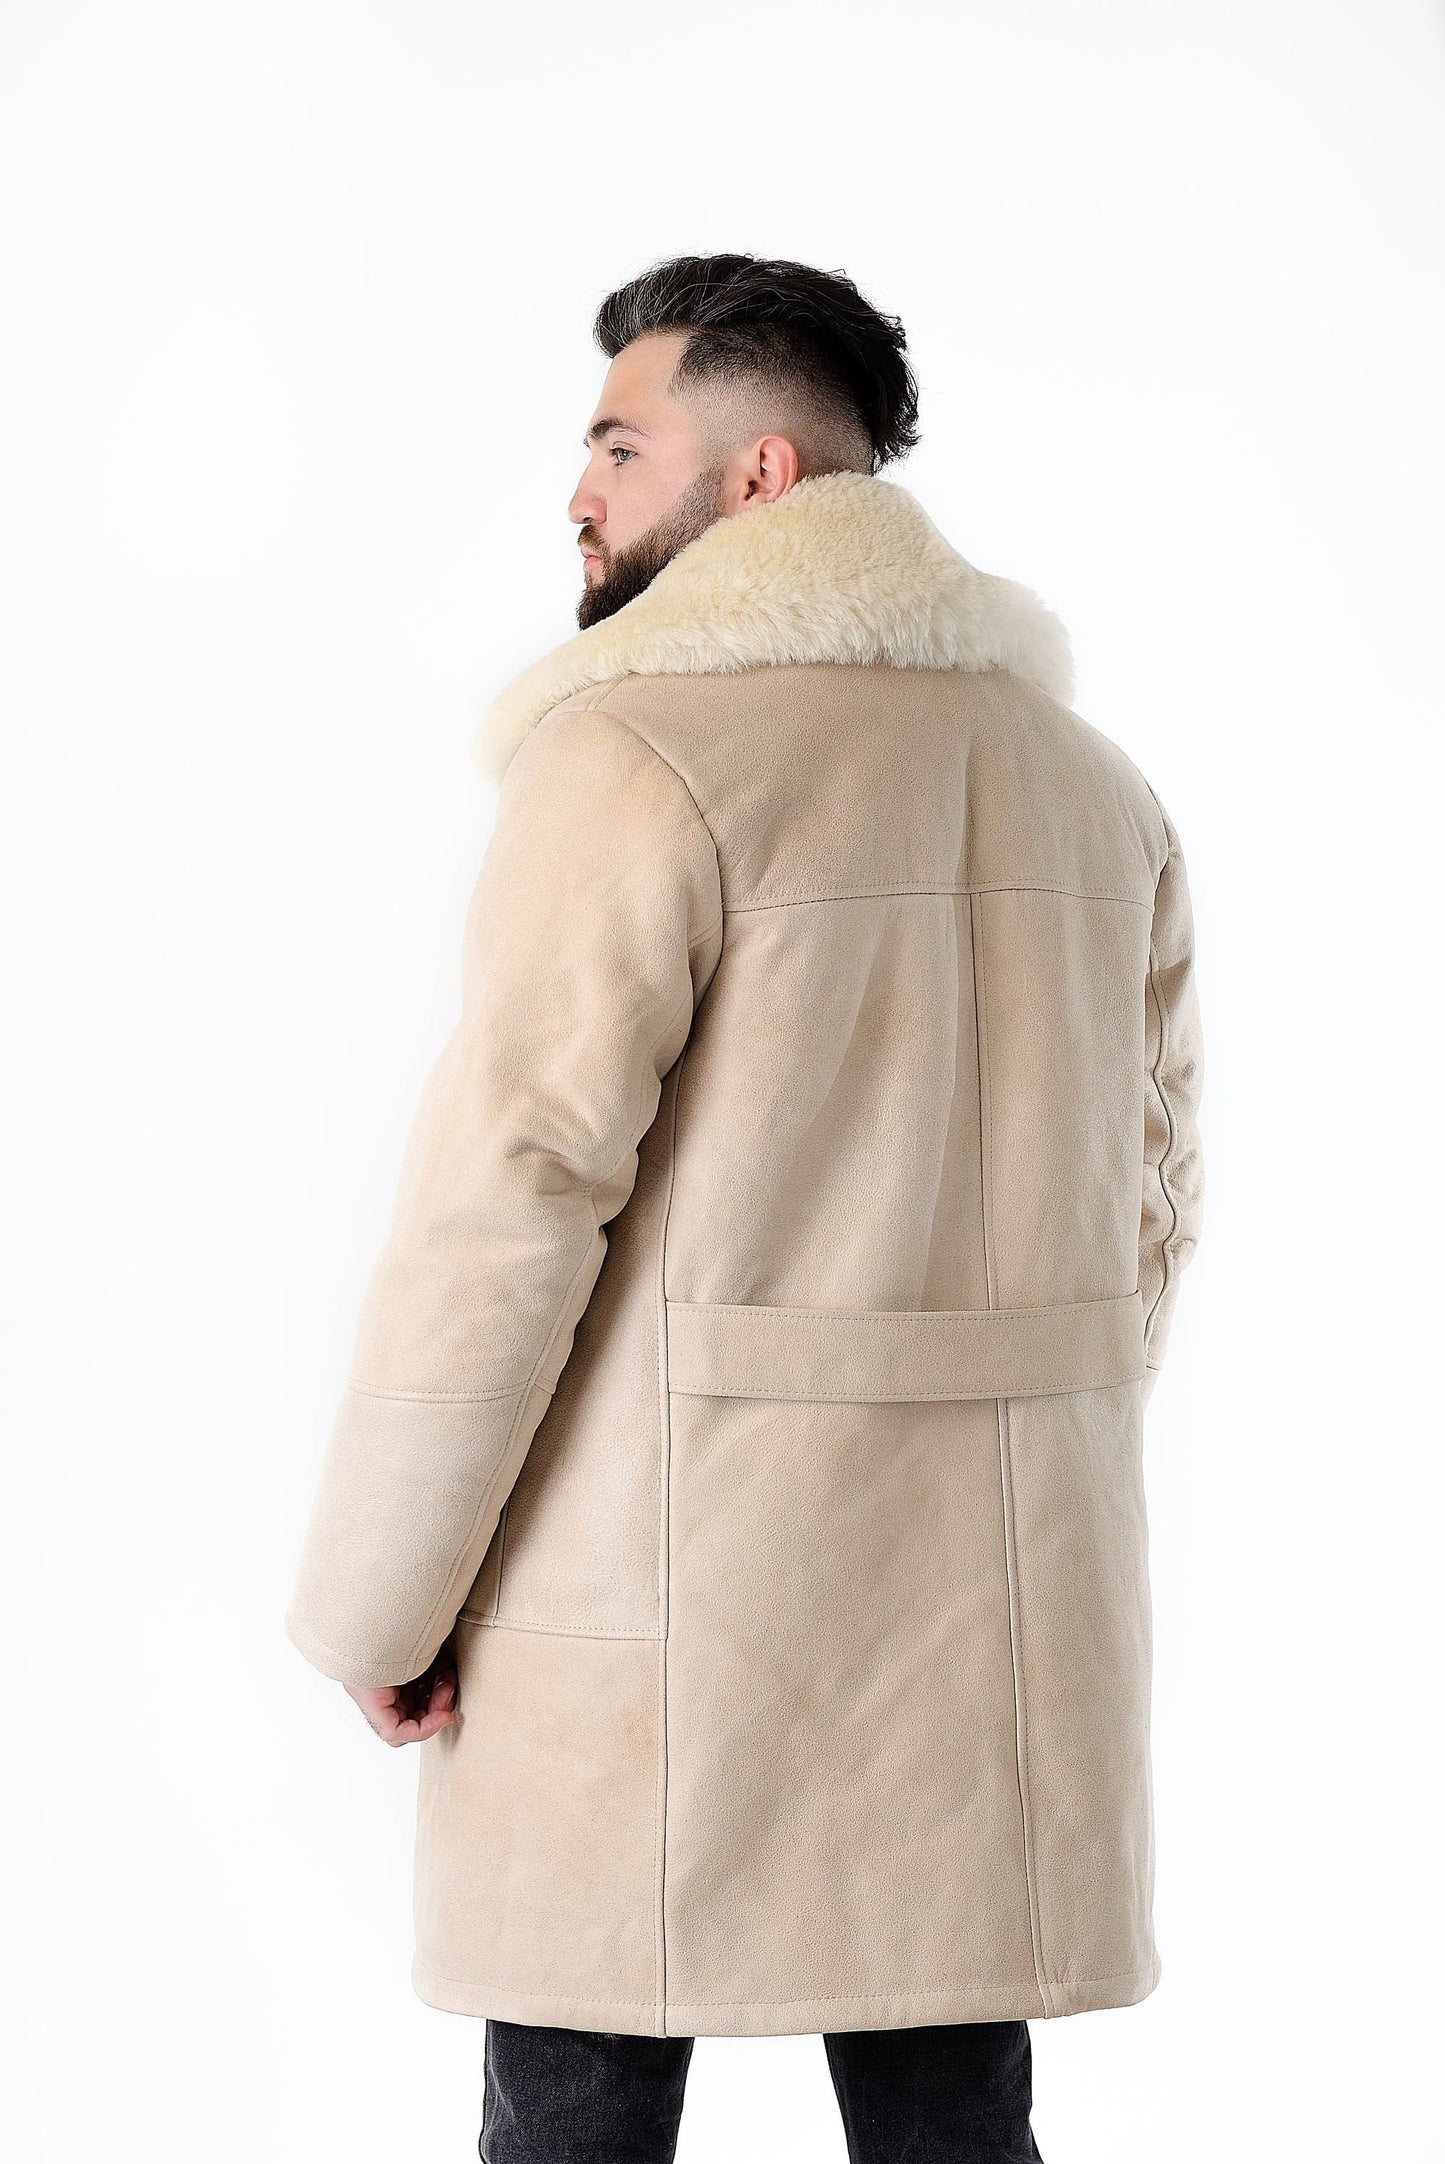 Mens Long Traditional Sheepskin Trench Coat in White Color with Wide Fur Collar